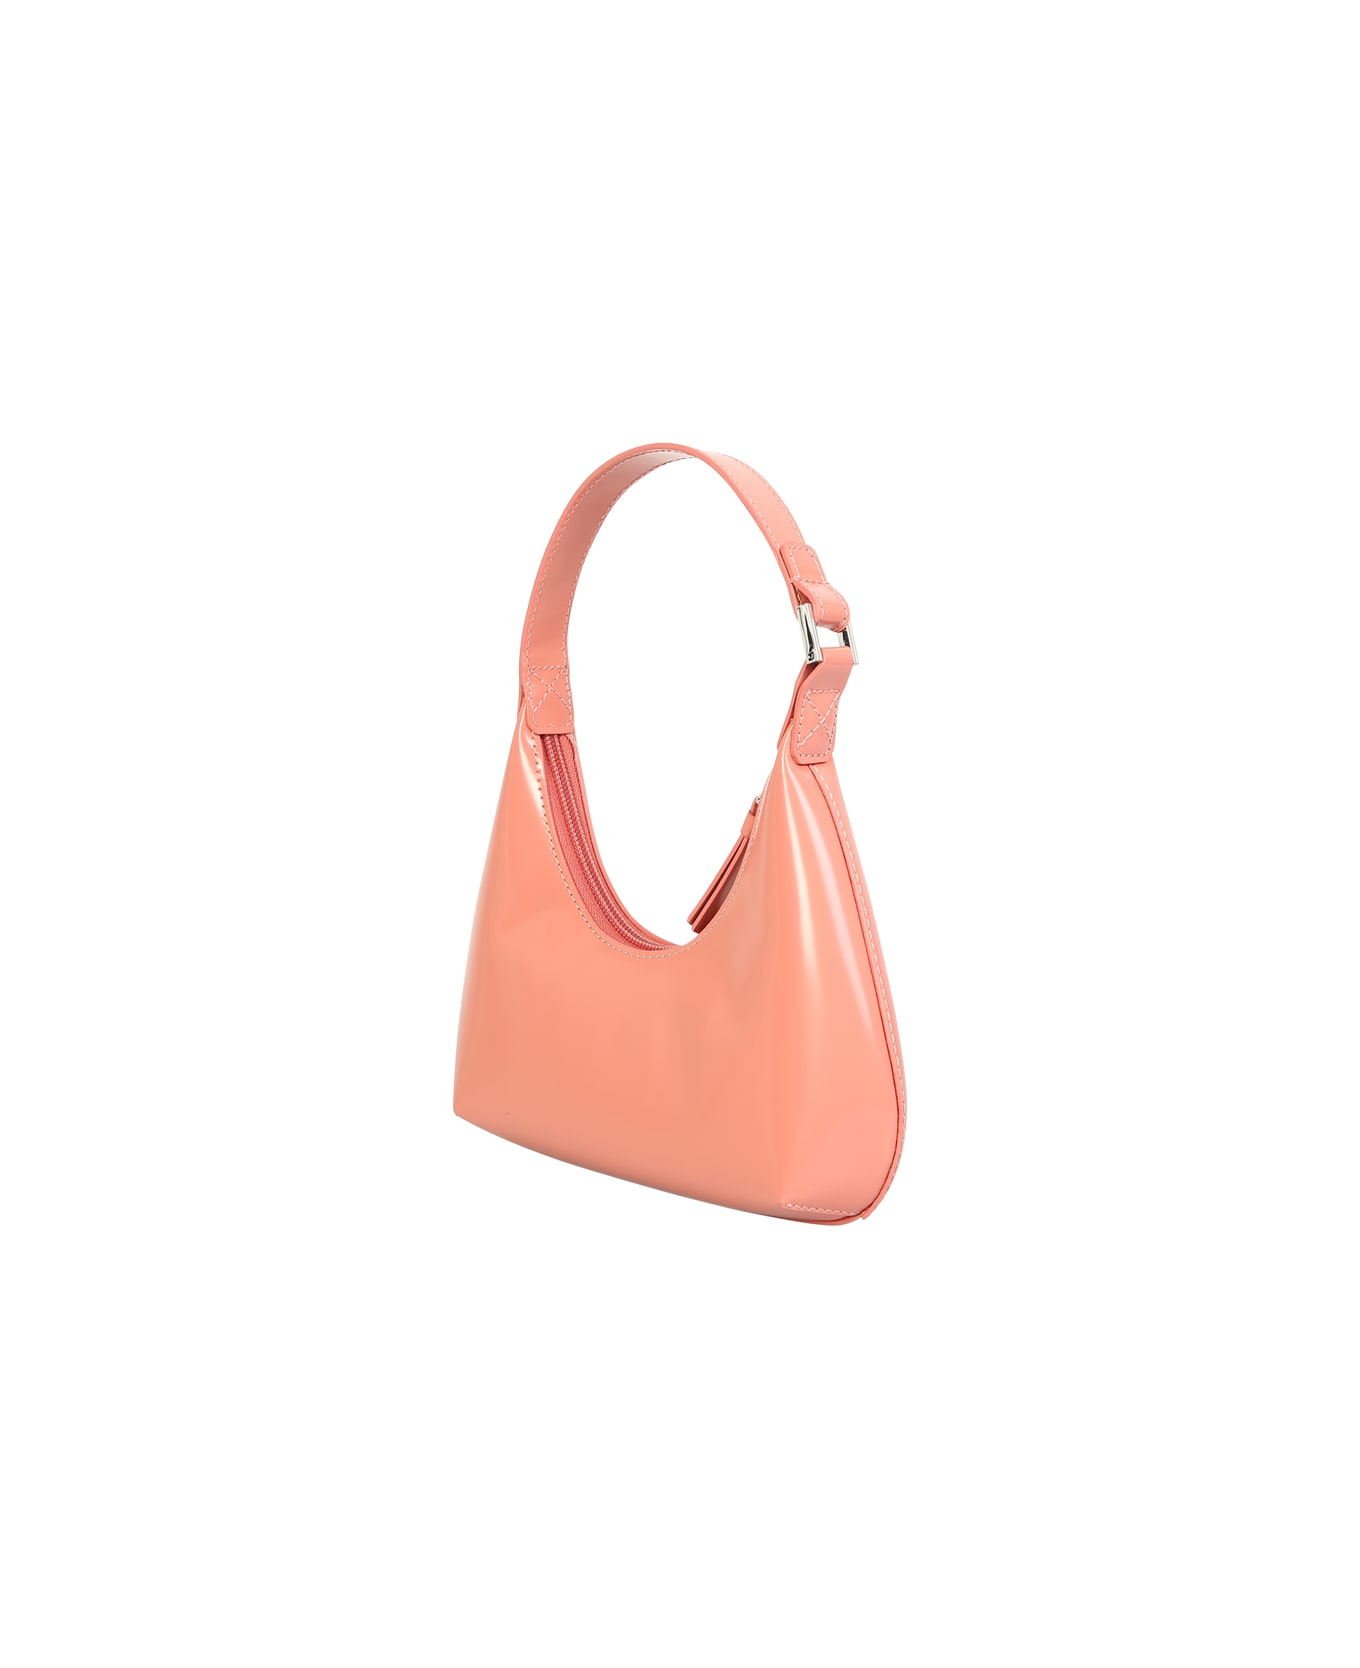 BY FAR Baby Salmon Semi Patent Leather Bag - Pink